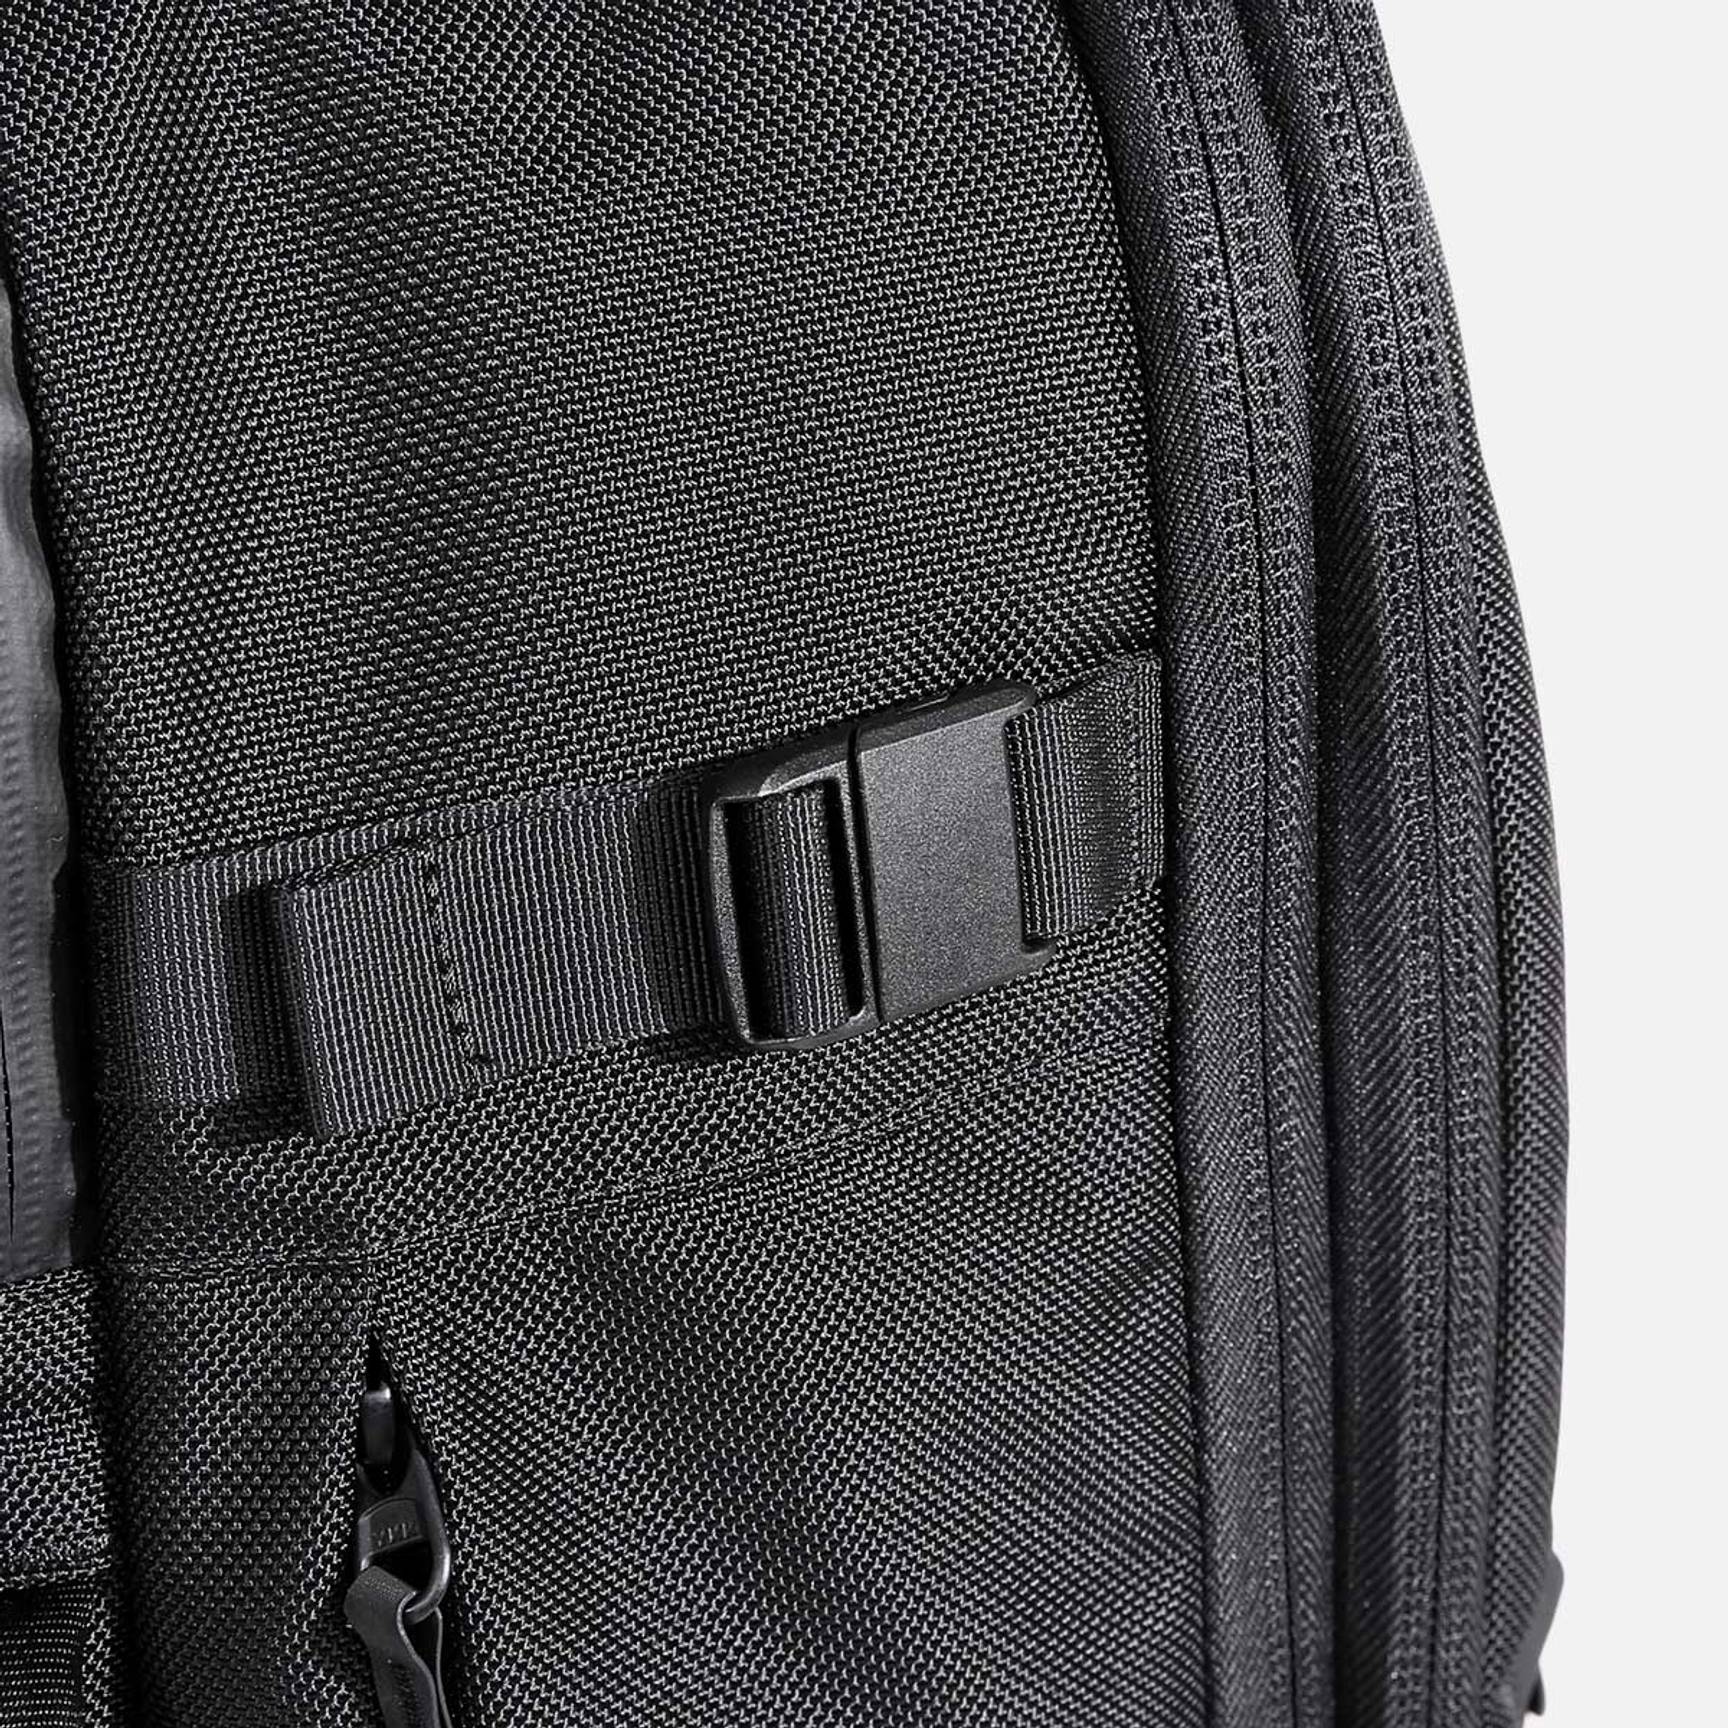 Aer Travel Pack 3 Small Backpack in Black